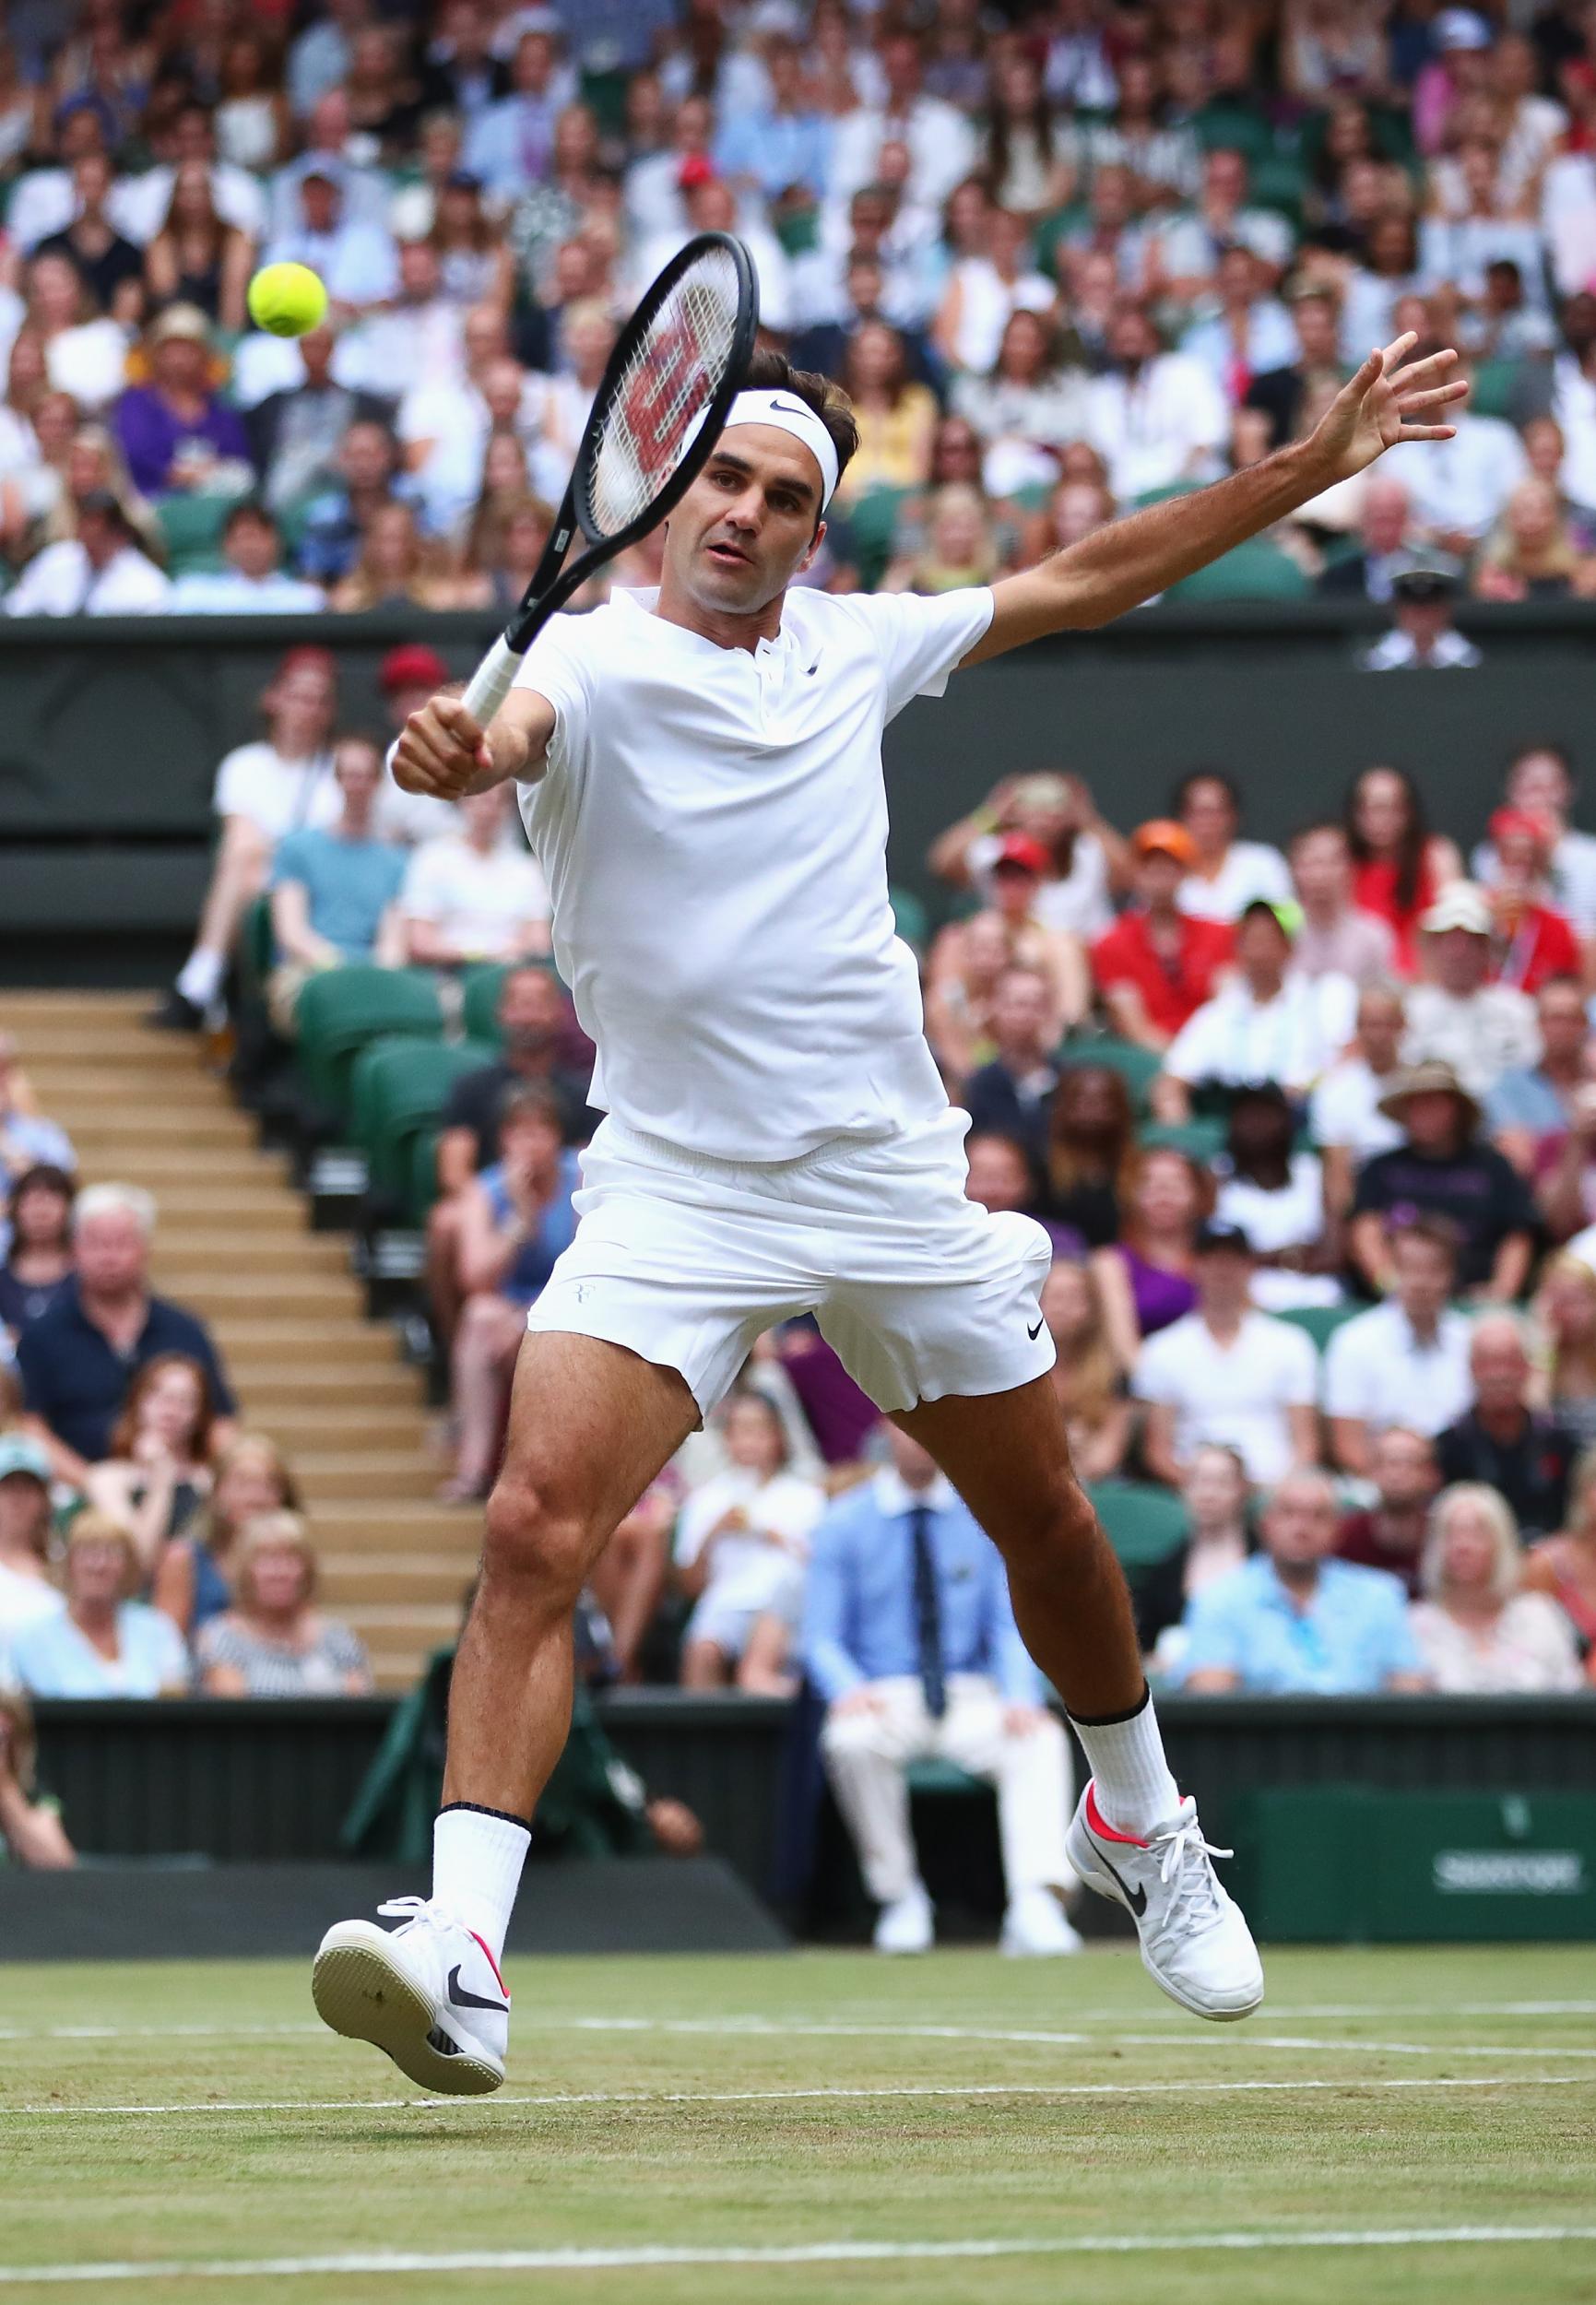 Federer is yet to drop a set at this year's Championships